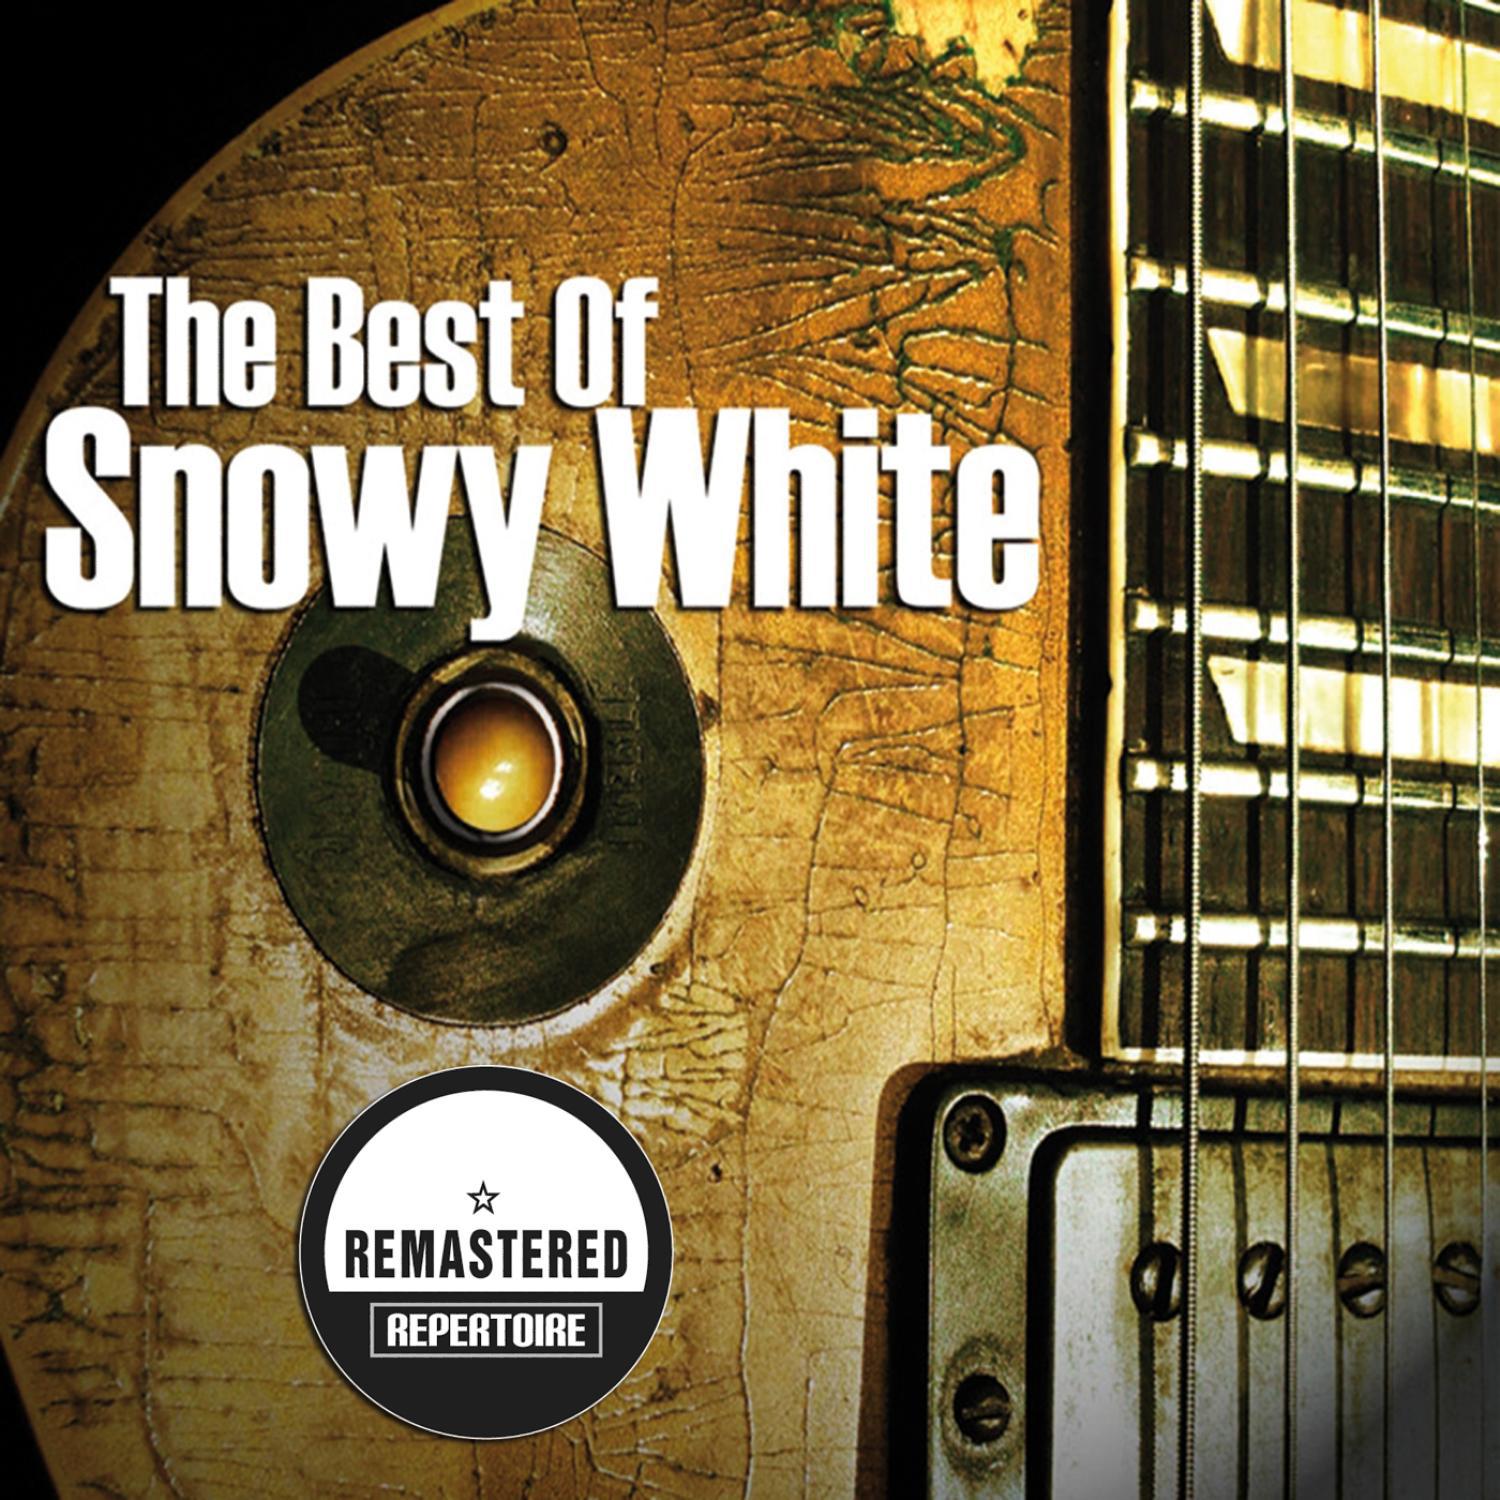 The Best Of Snowy White (Remastered)